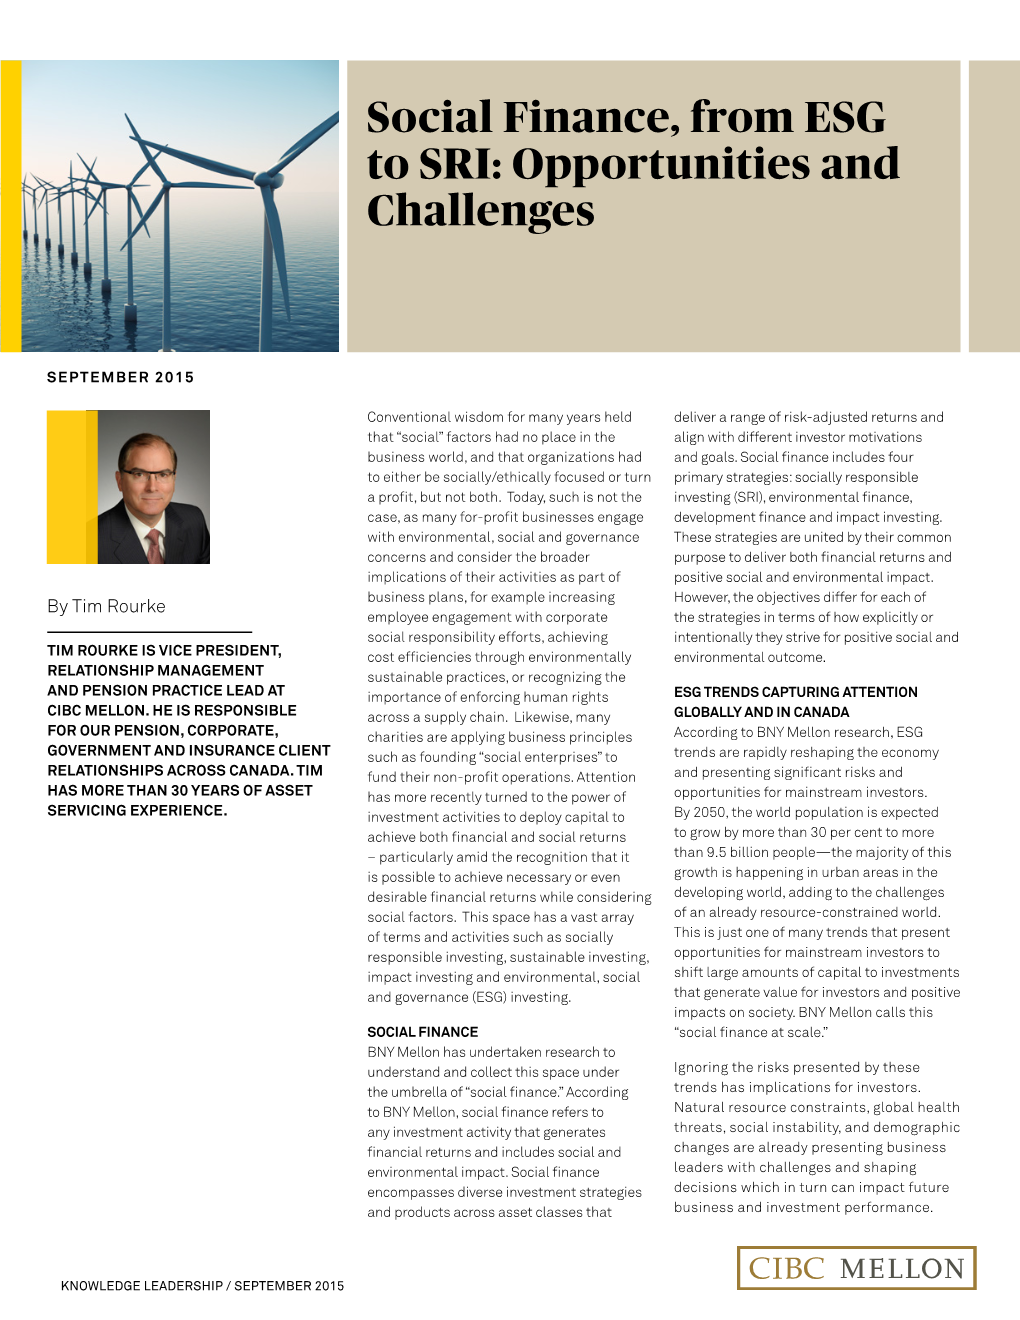 Social Finance, from ESG to SRI: Opportunities and Challenges